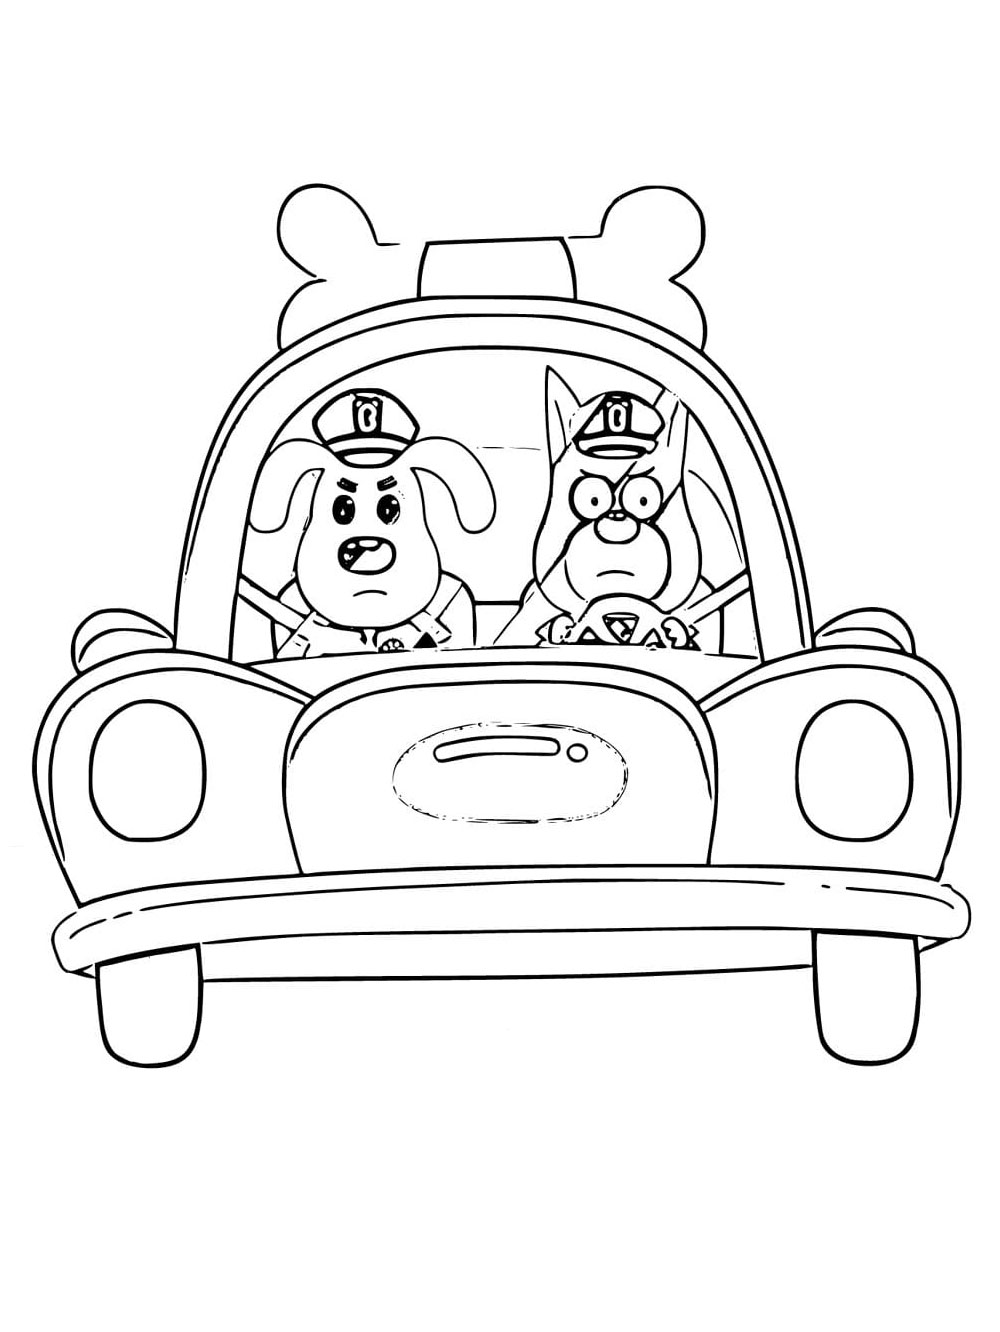 Sheriff Labrador coloring pages